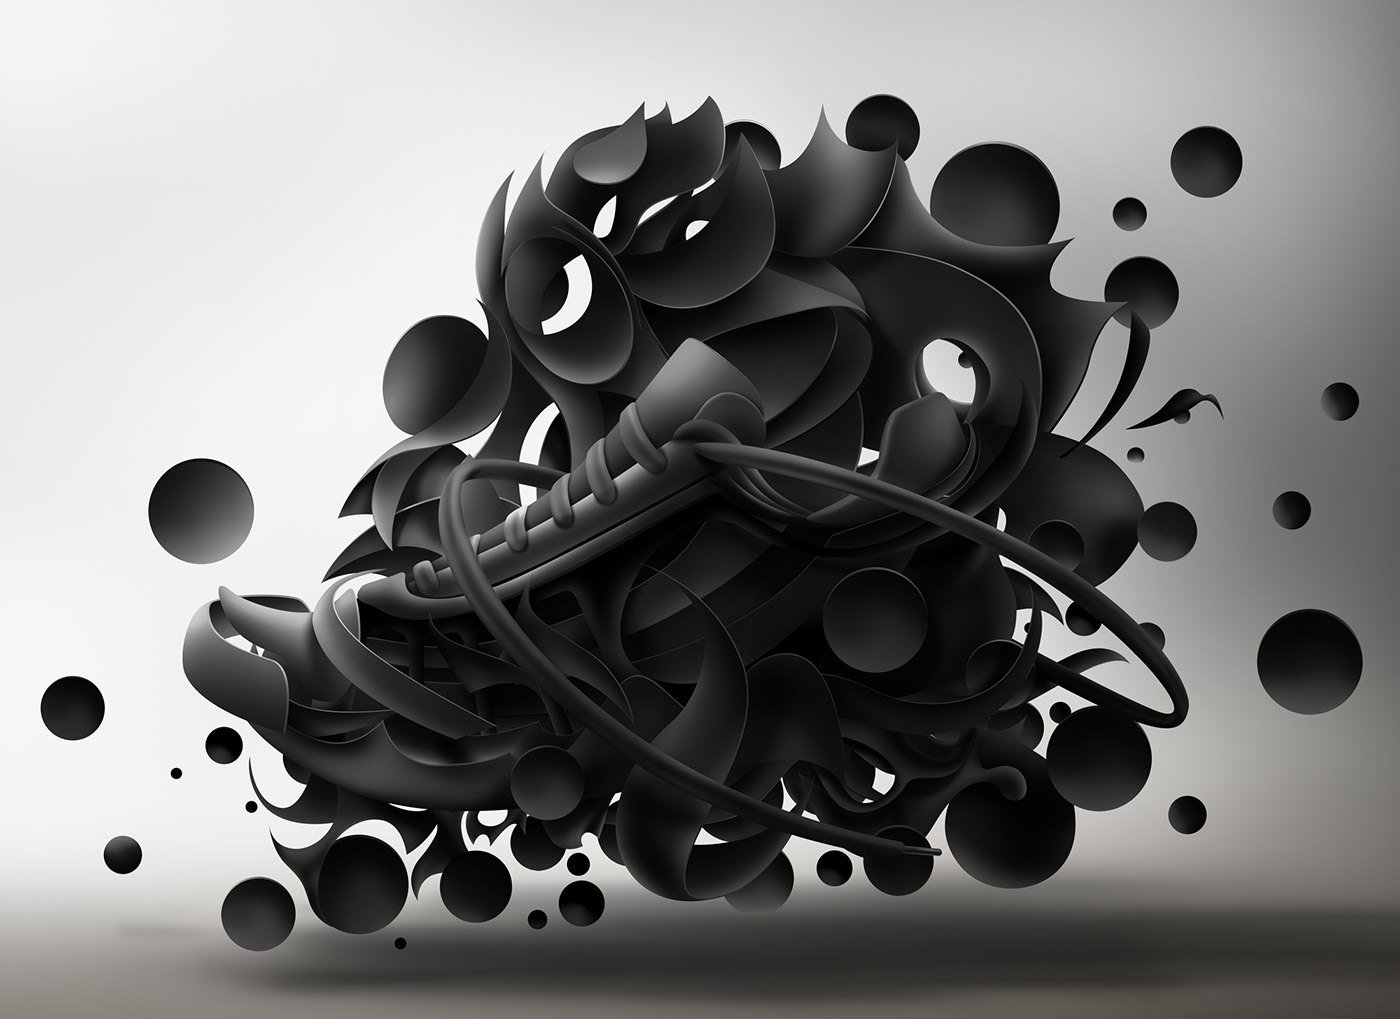 Illustration of abstract sneakers by Marcelo Schultz